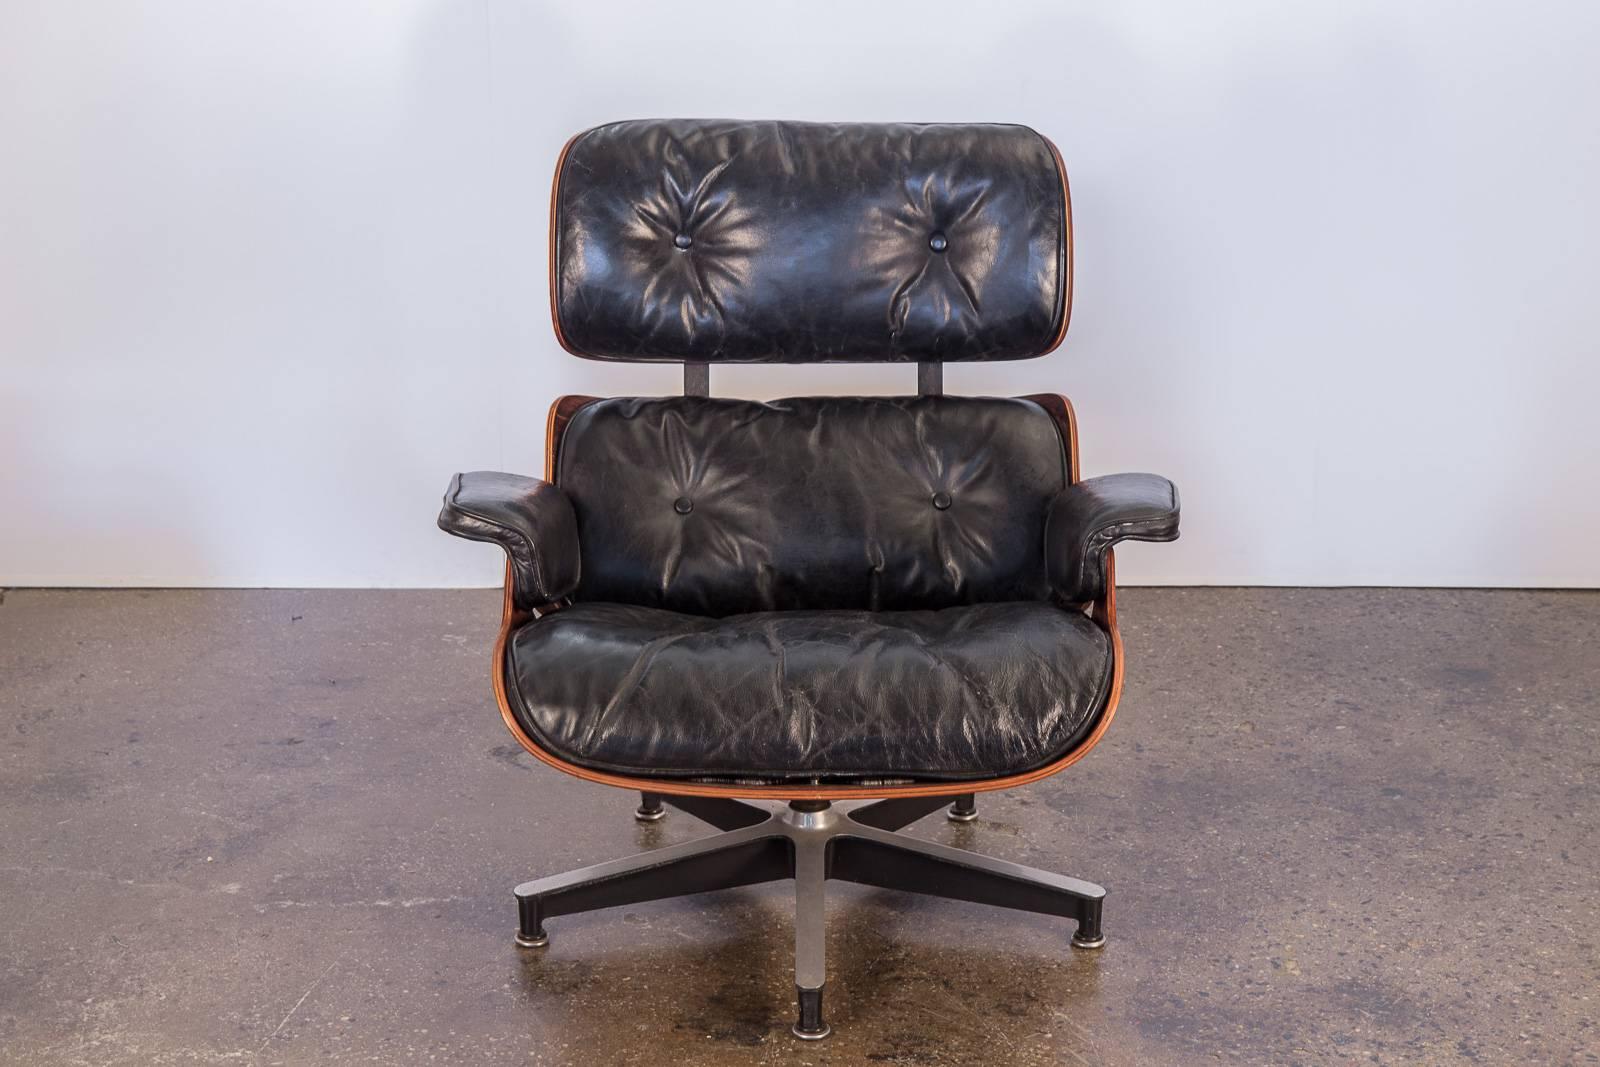 Second generation 670 lounge chair by Charles and Ray Eames for Herman Miller. The ultimate MCM lounge chair. This early 1960s example is in very good condition. Molded plywood frame has a stunning Brazilian rosewood veneer, whose grain undulates in